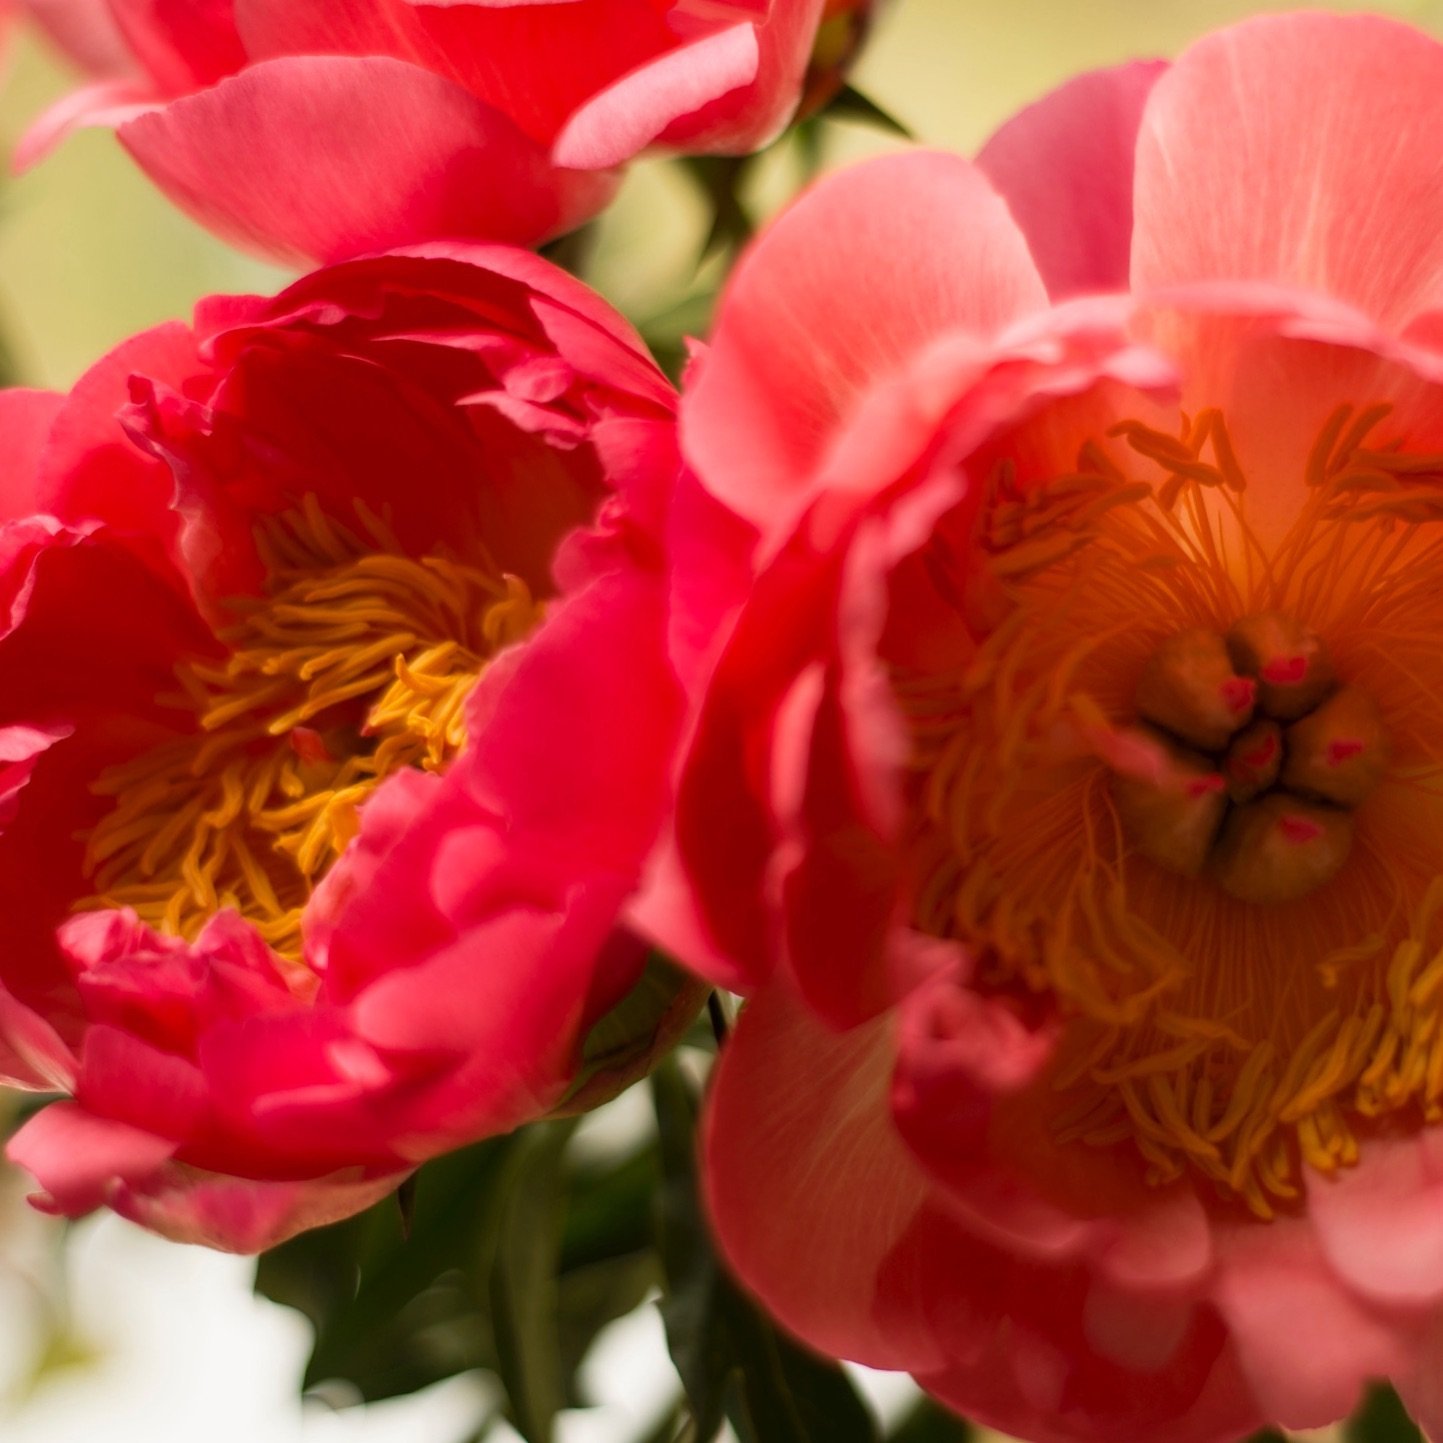 Fun Flower Fact 8.
.
Did you know that Peonies can be used to treat inflammation? The roots and seeds have been used in traditional Chinese medicine for centuries to treat headaches, asthma and liver disease.
.
And I bet you wouldn&rsquo;t guess wher